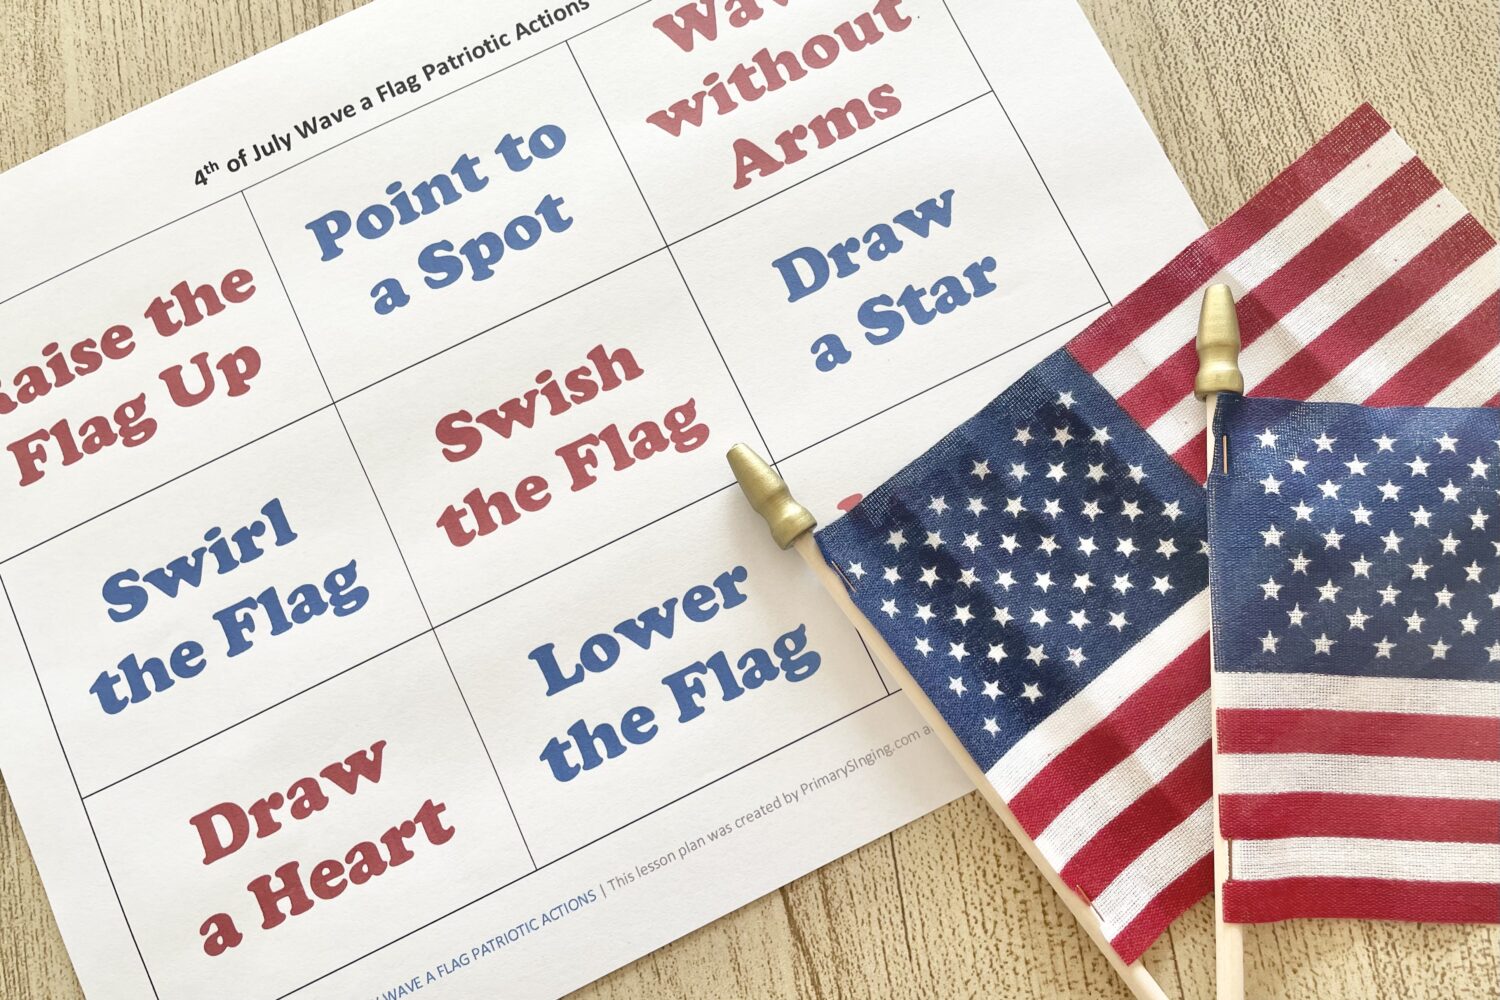 4th of July Wave a Flag Patriotic Actions singing time idea! Try these fun patriotic actions with a mini-American flag with printable action cards for LDS Primary Music Leaders.